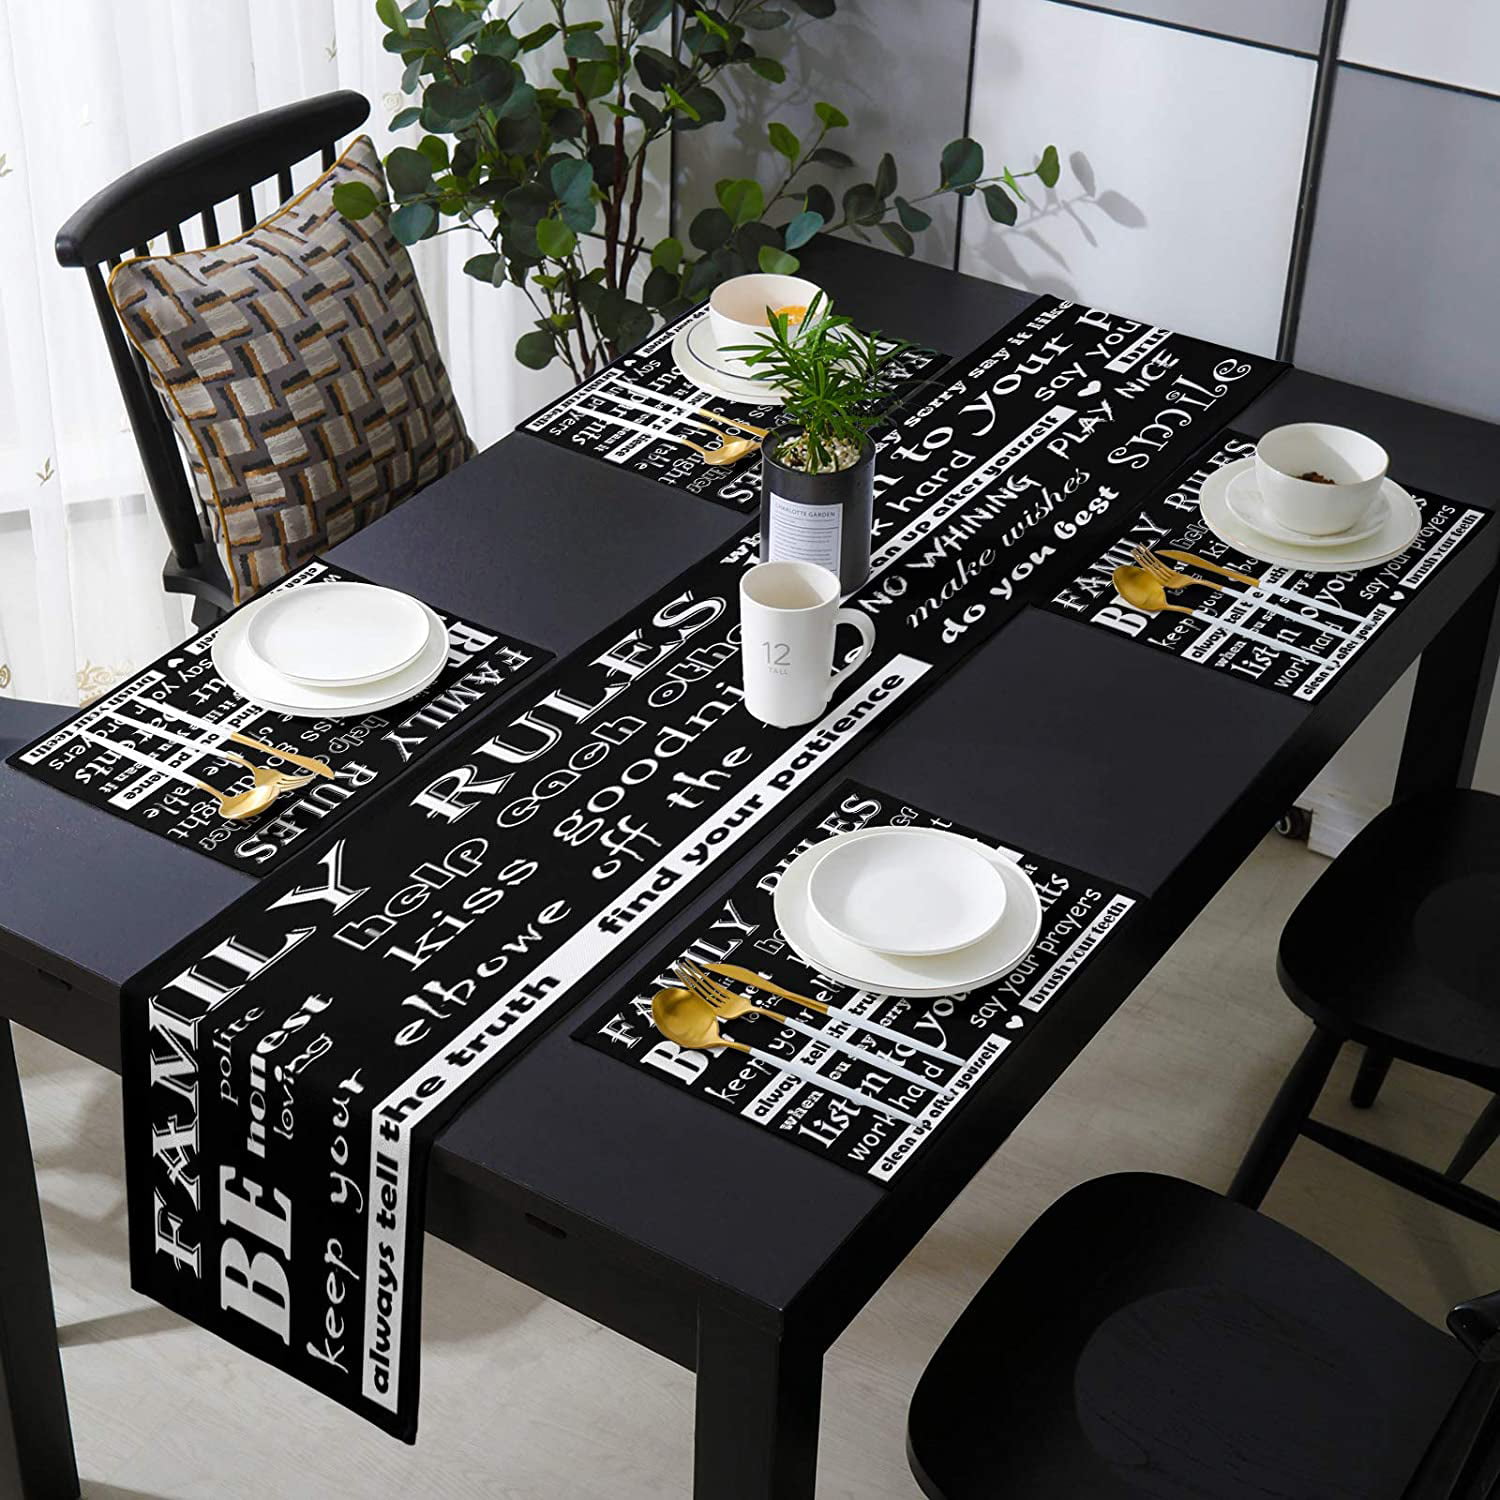 Iguohao Table Runner With 6 Place Mats, What Size Table Runner For 6 Chair Dining